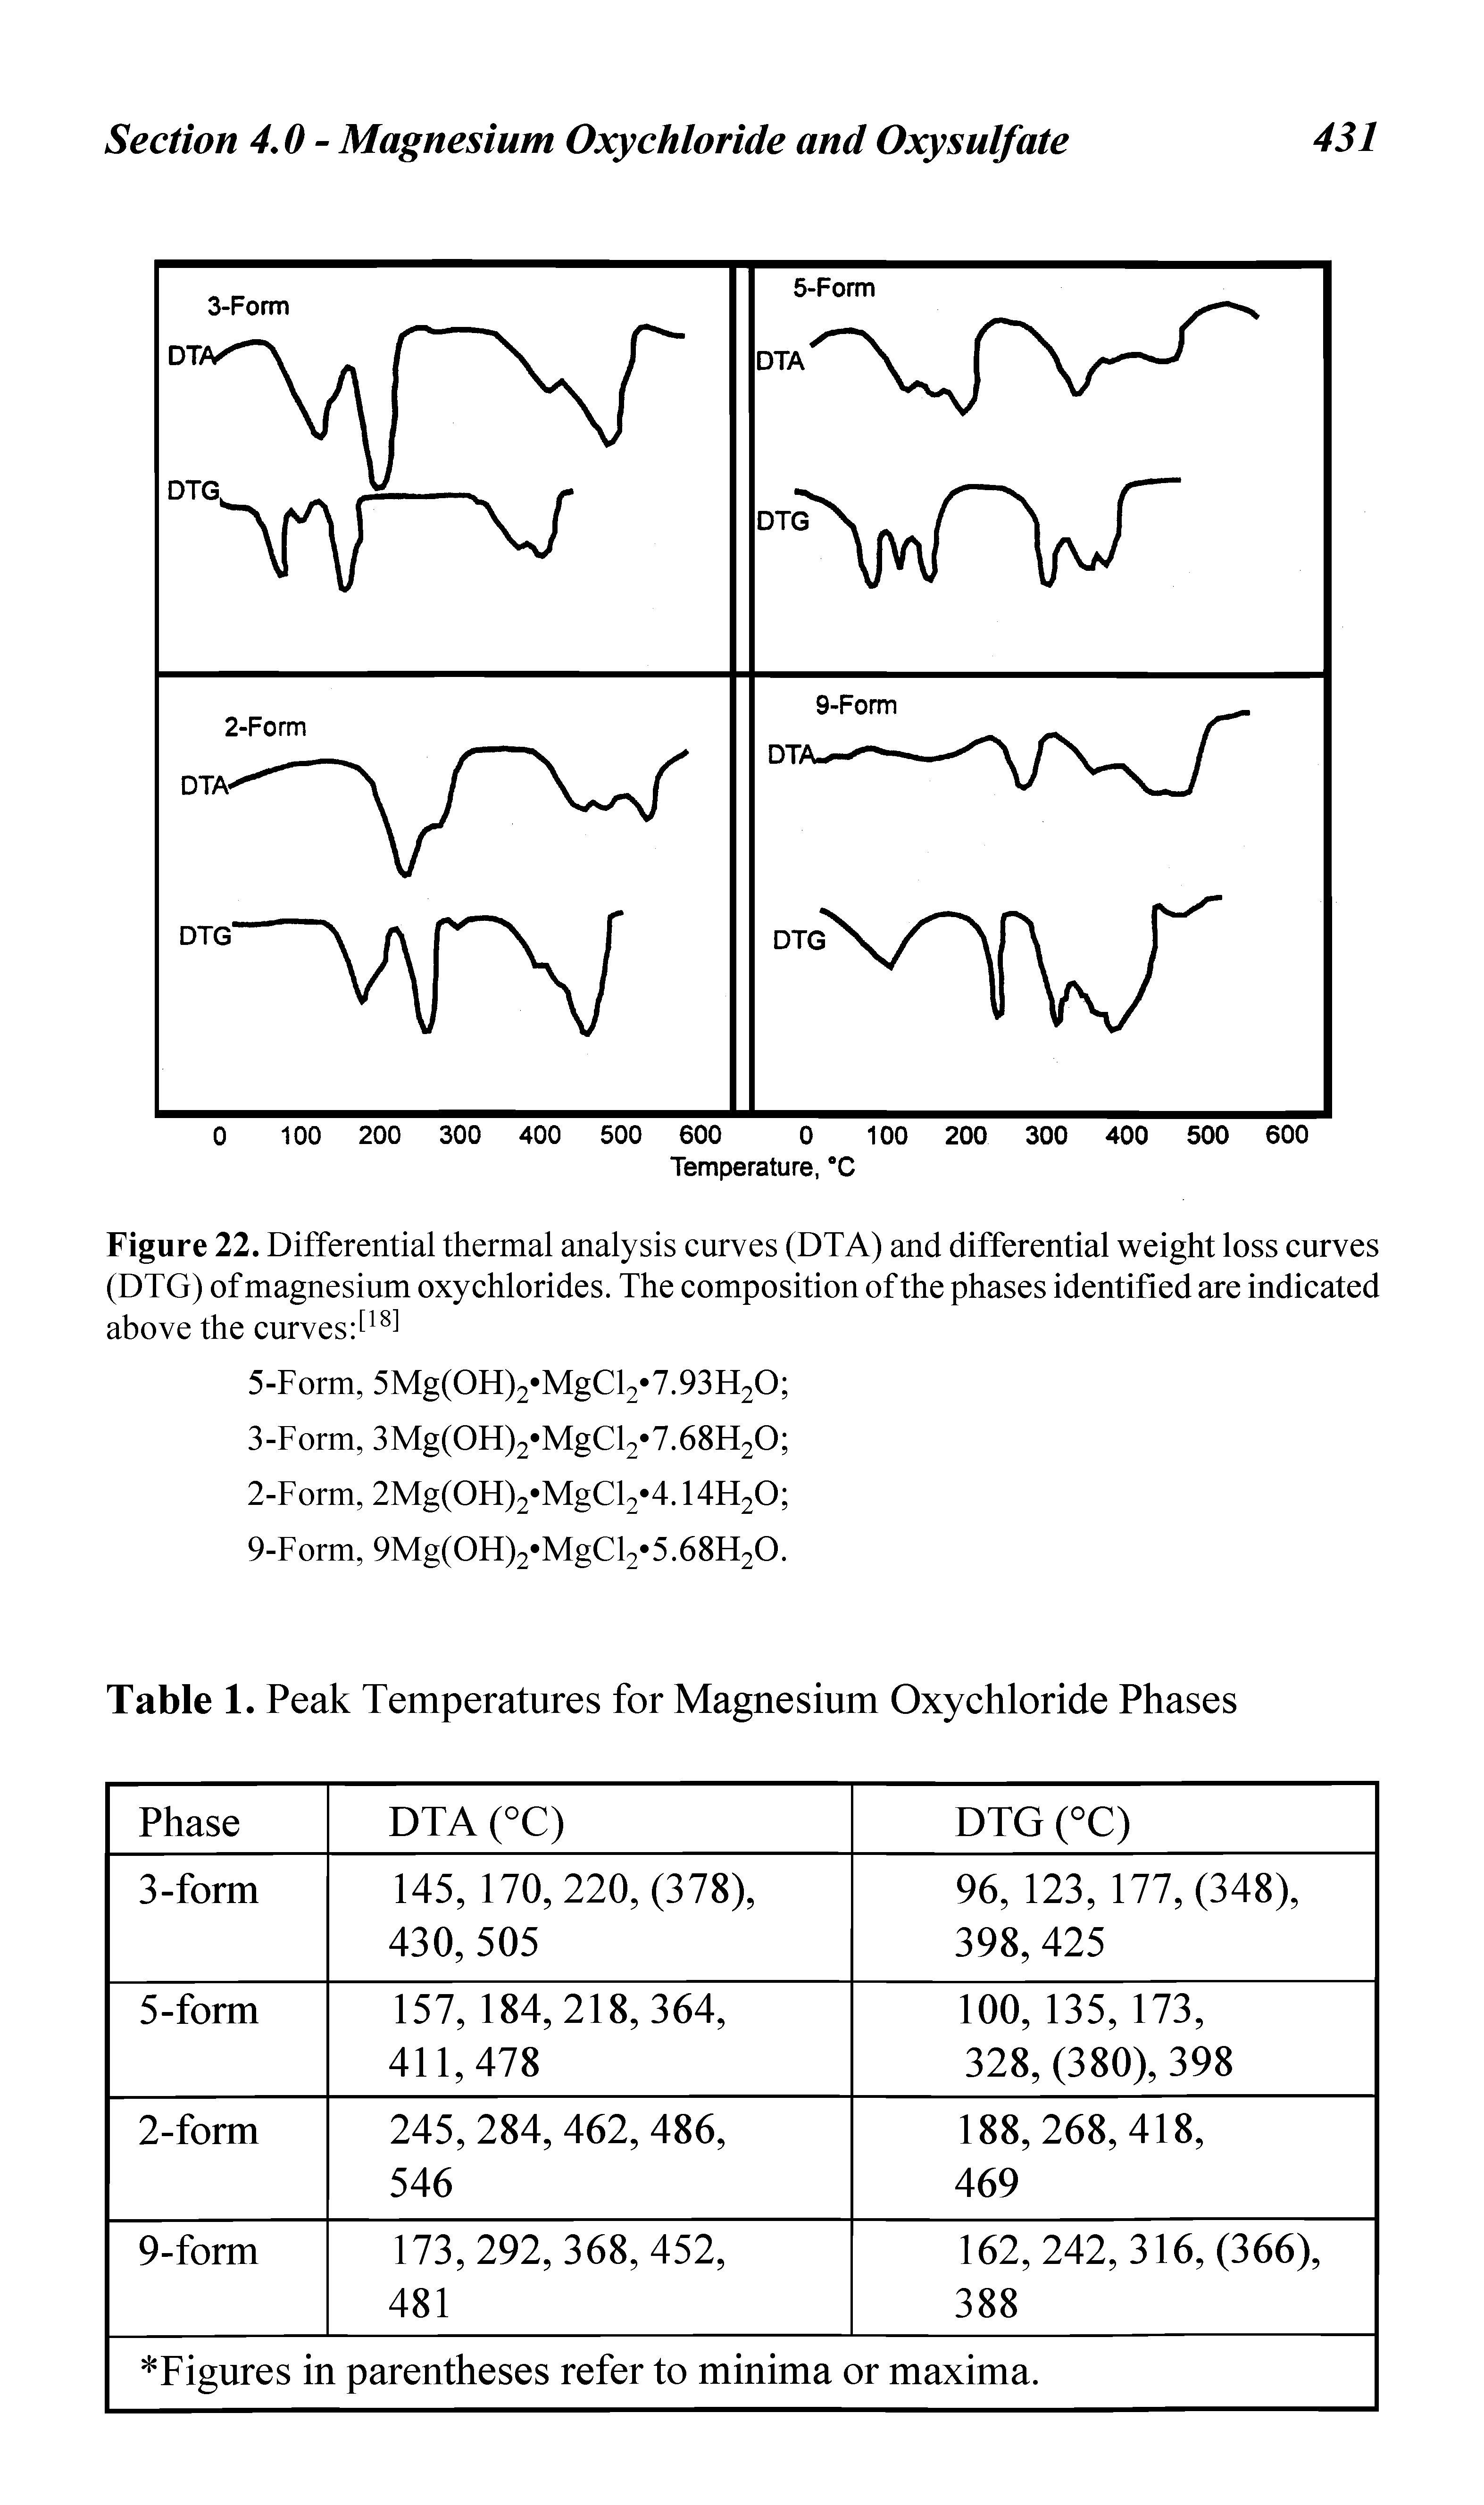 Figure 22. Differential thermal analysis curves (DTA) and differential weight loss curves (DTG) of magnesium oxychlorides. The composition of the phases identified are indicated above the curves...